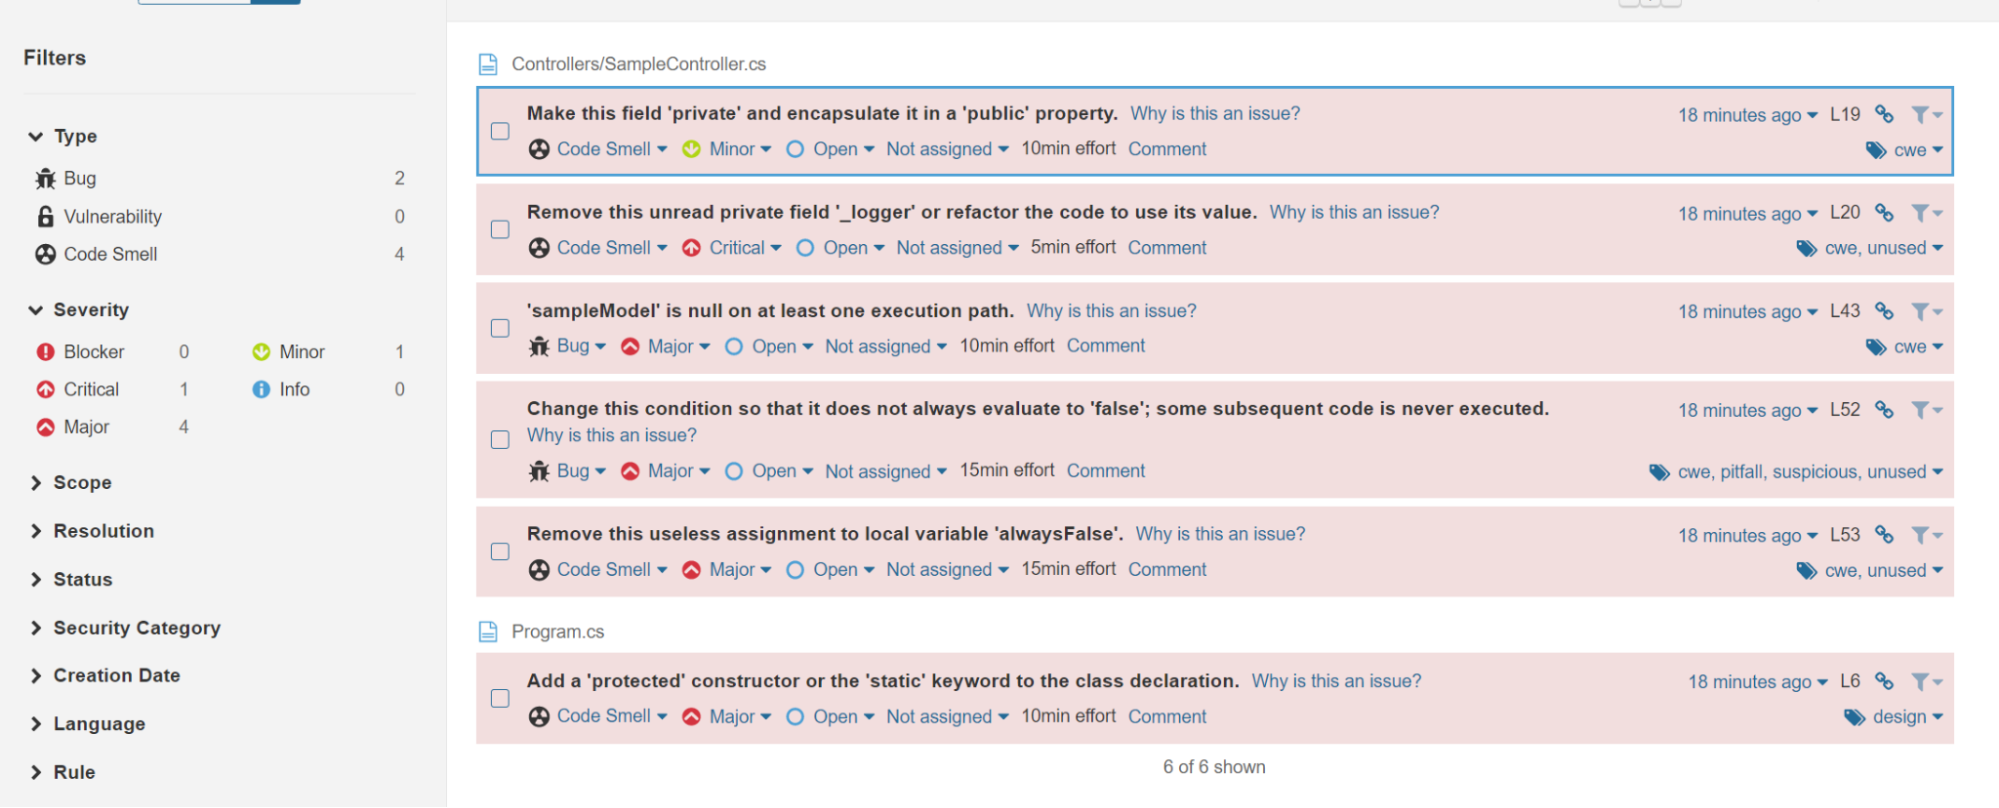 Screenshot of Listed Issues In Source Code